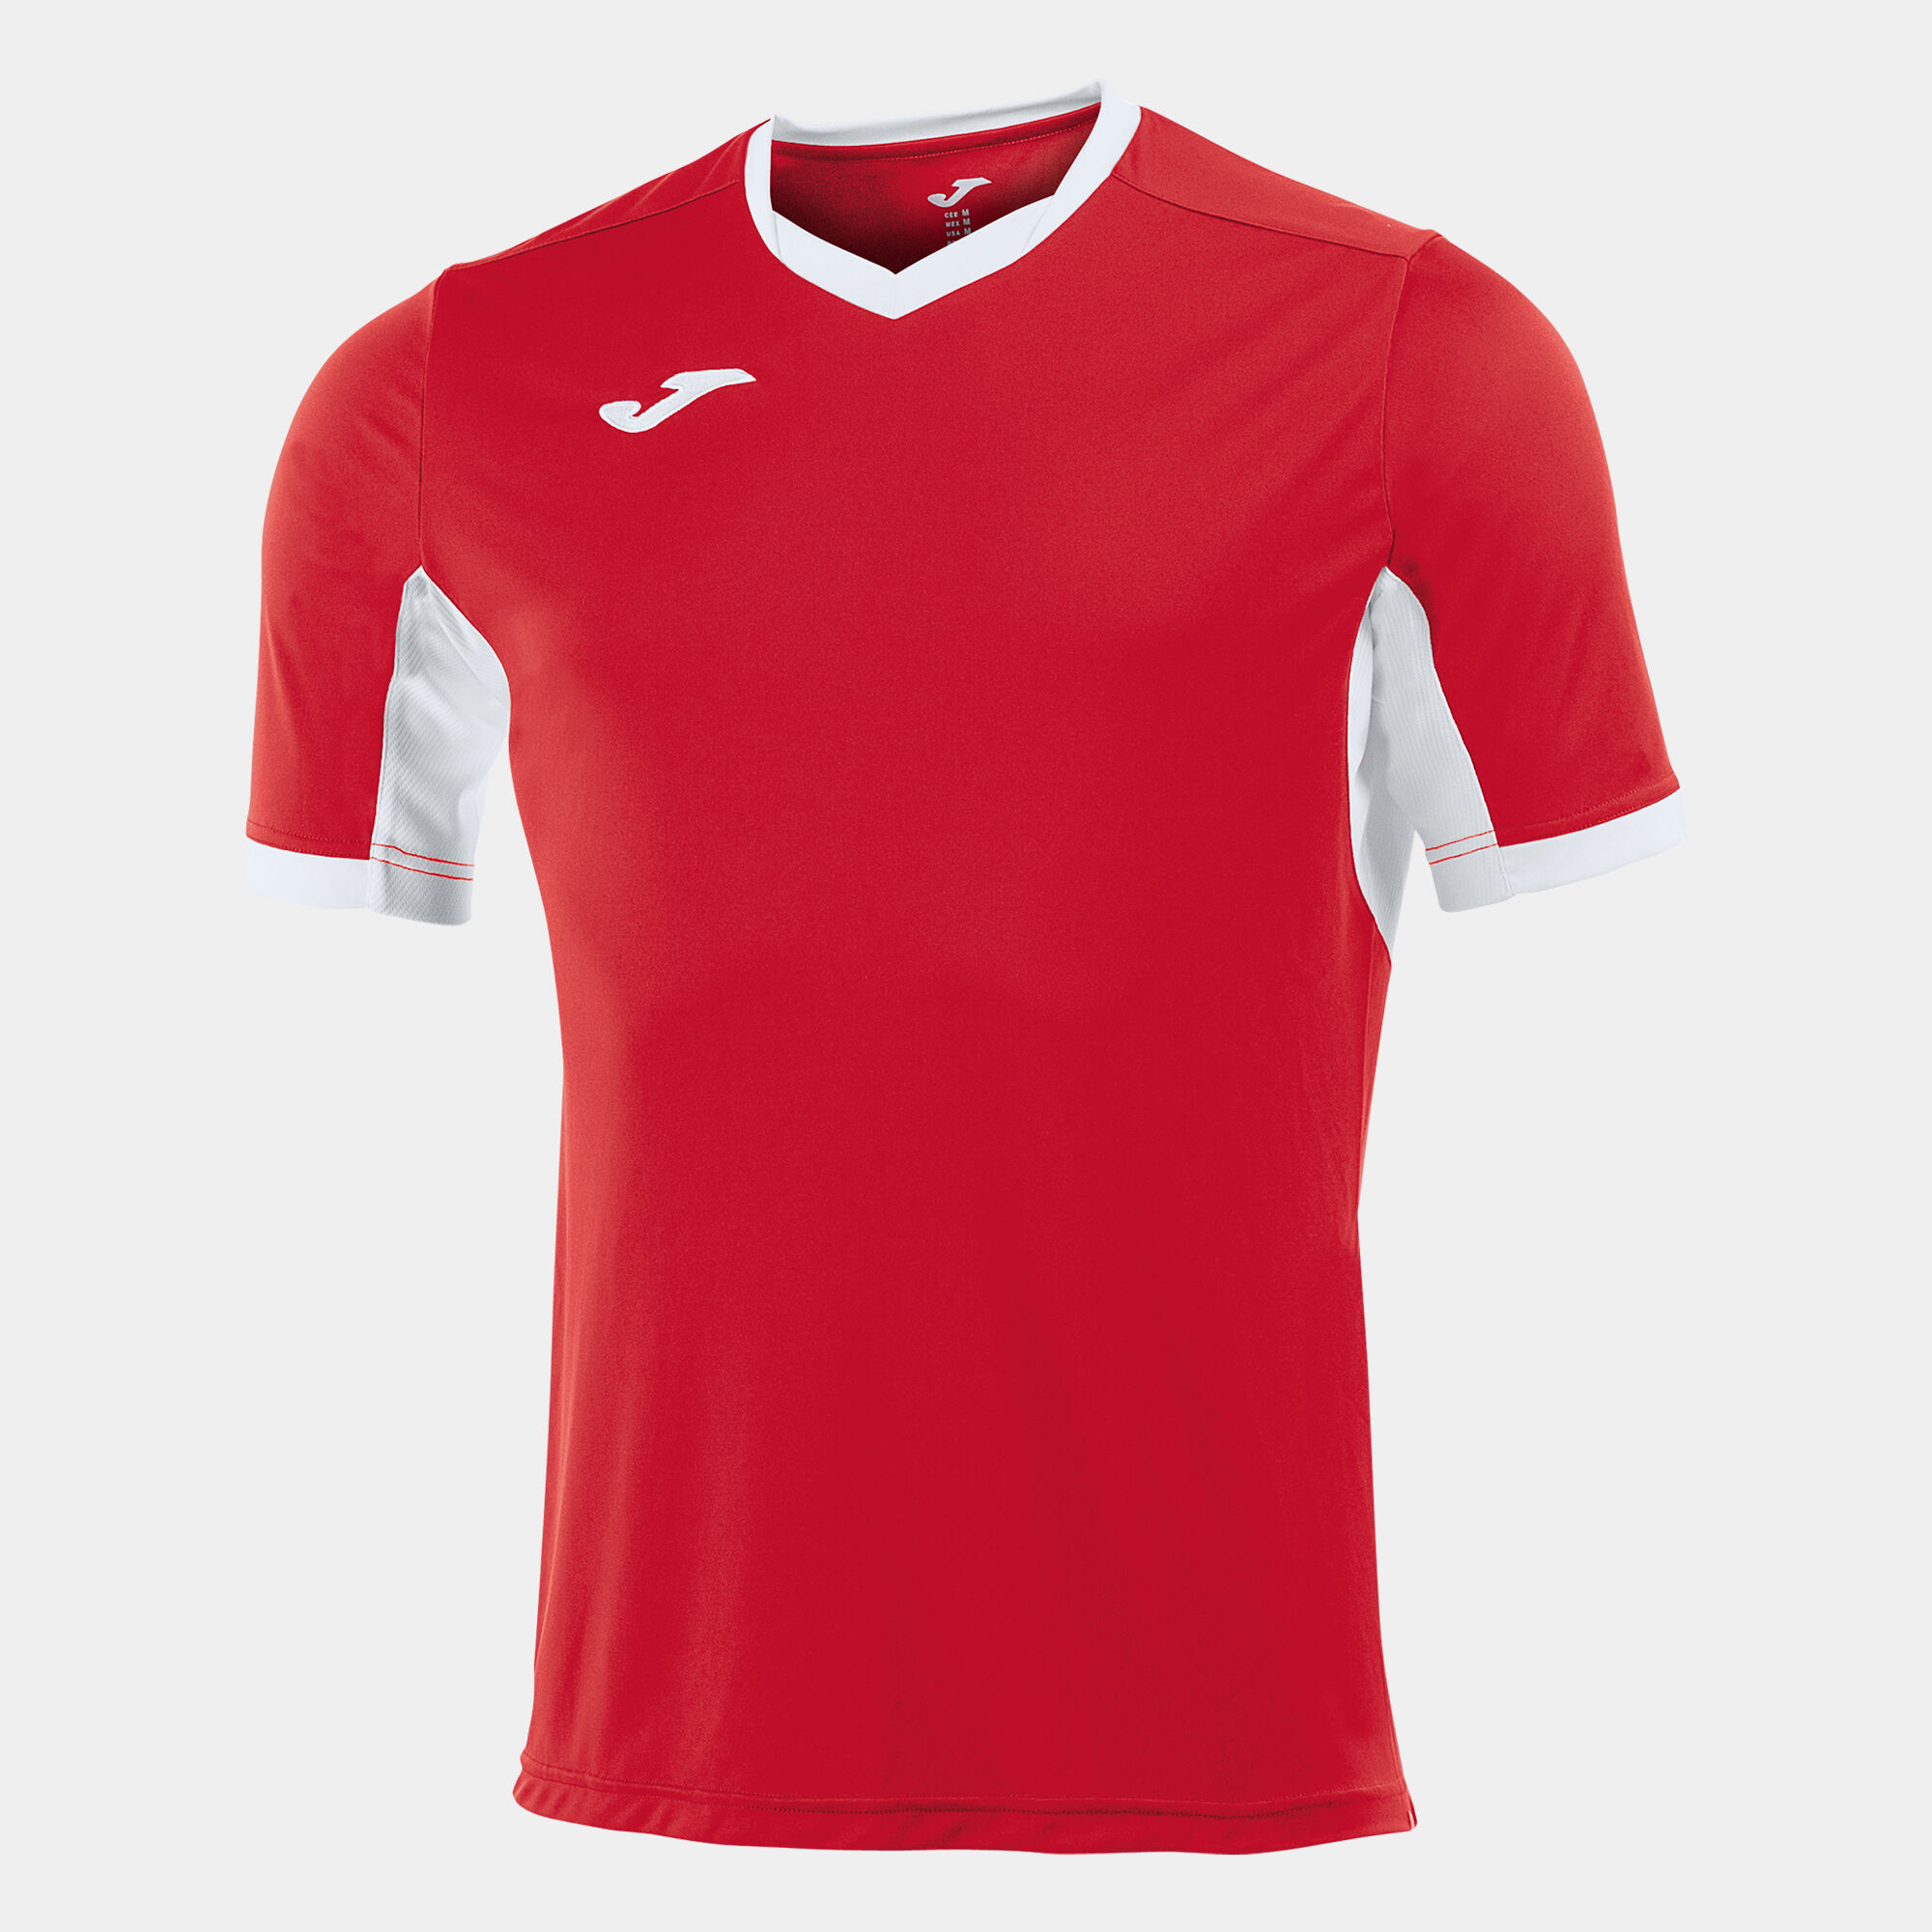 MAILLOT MANCHES COURTES HOMME CHAMPIONSHIP IV ROUGE BLANC